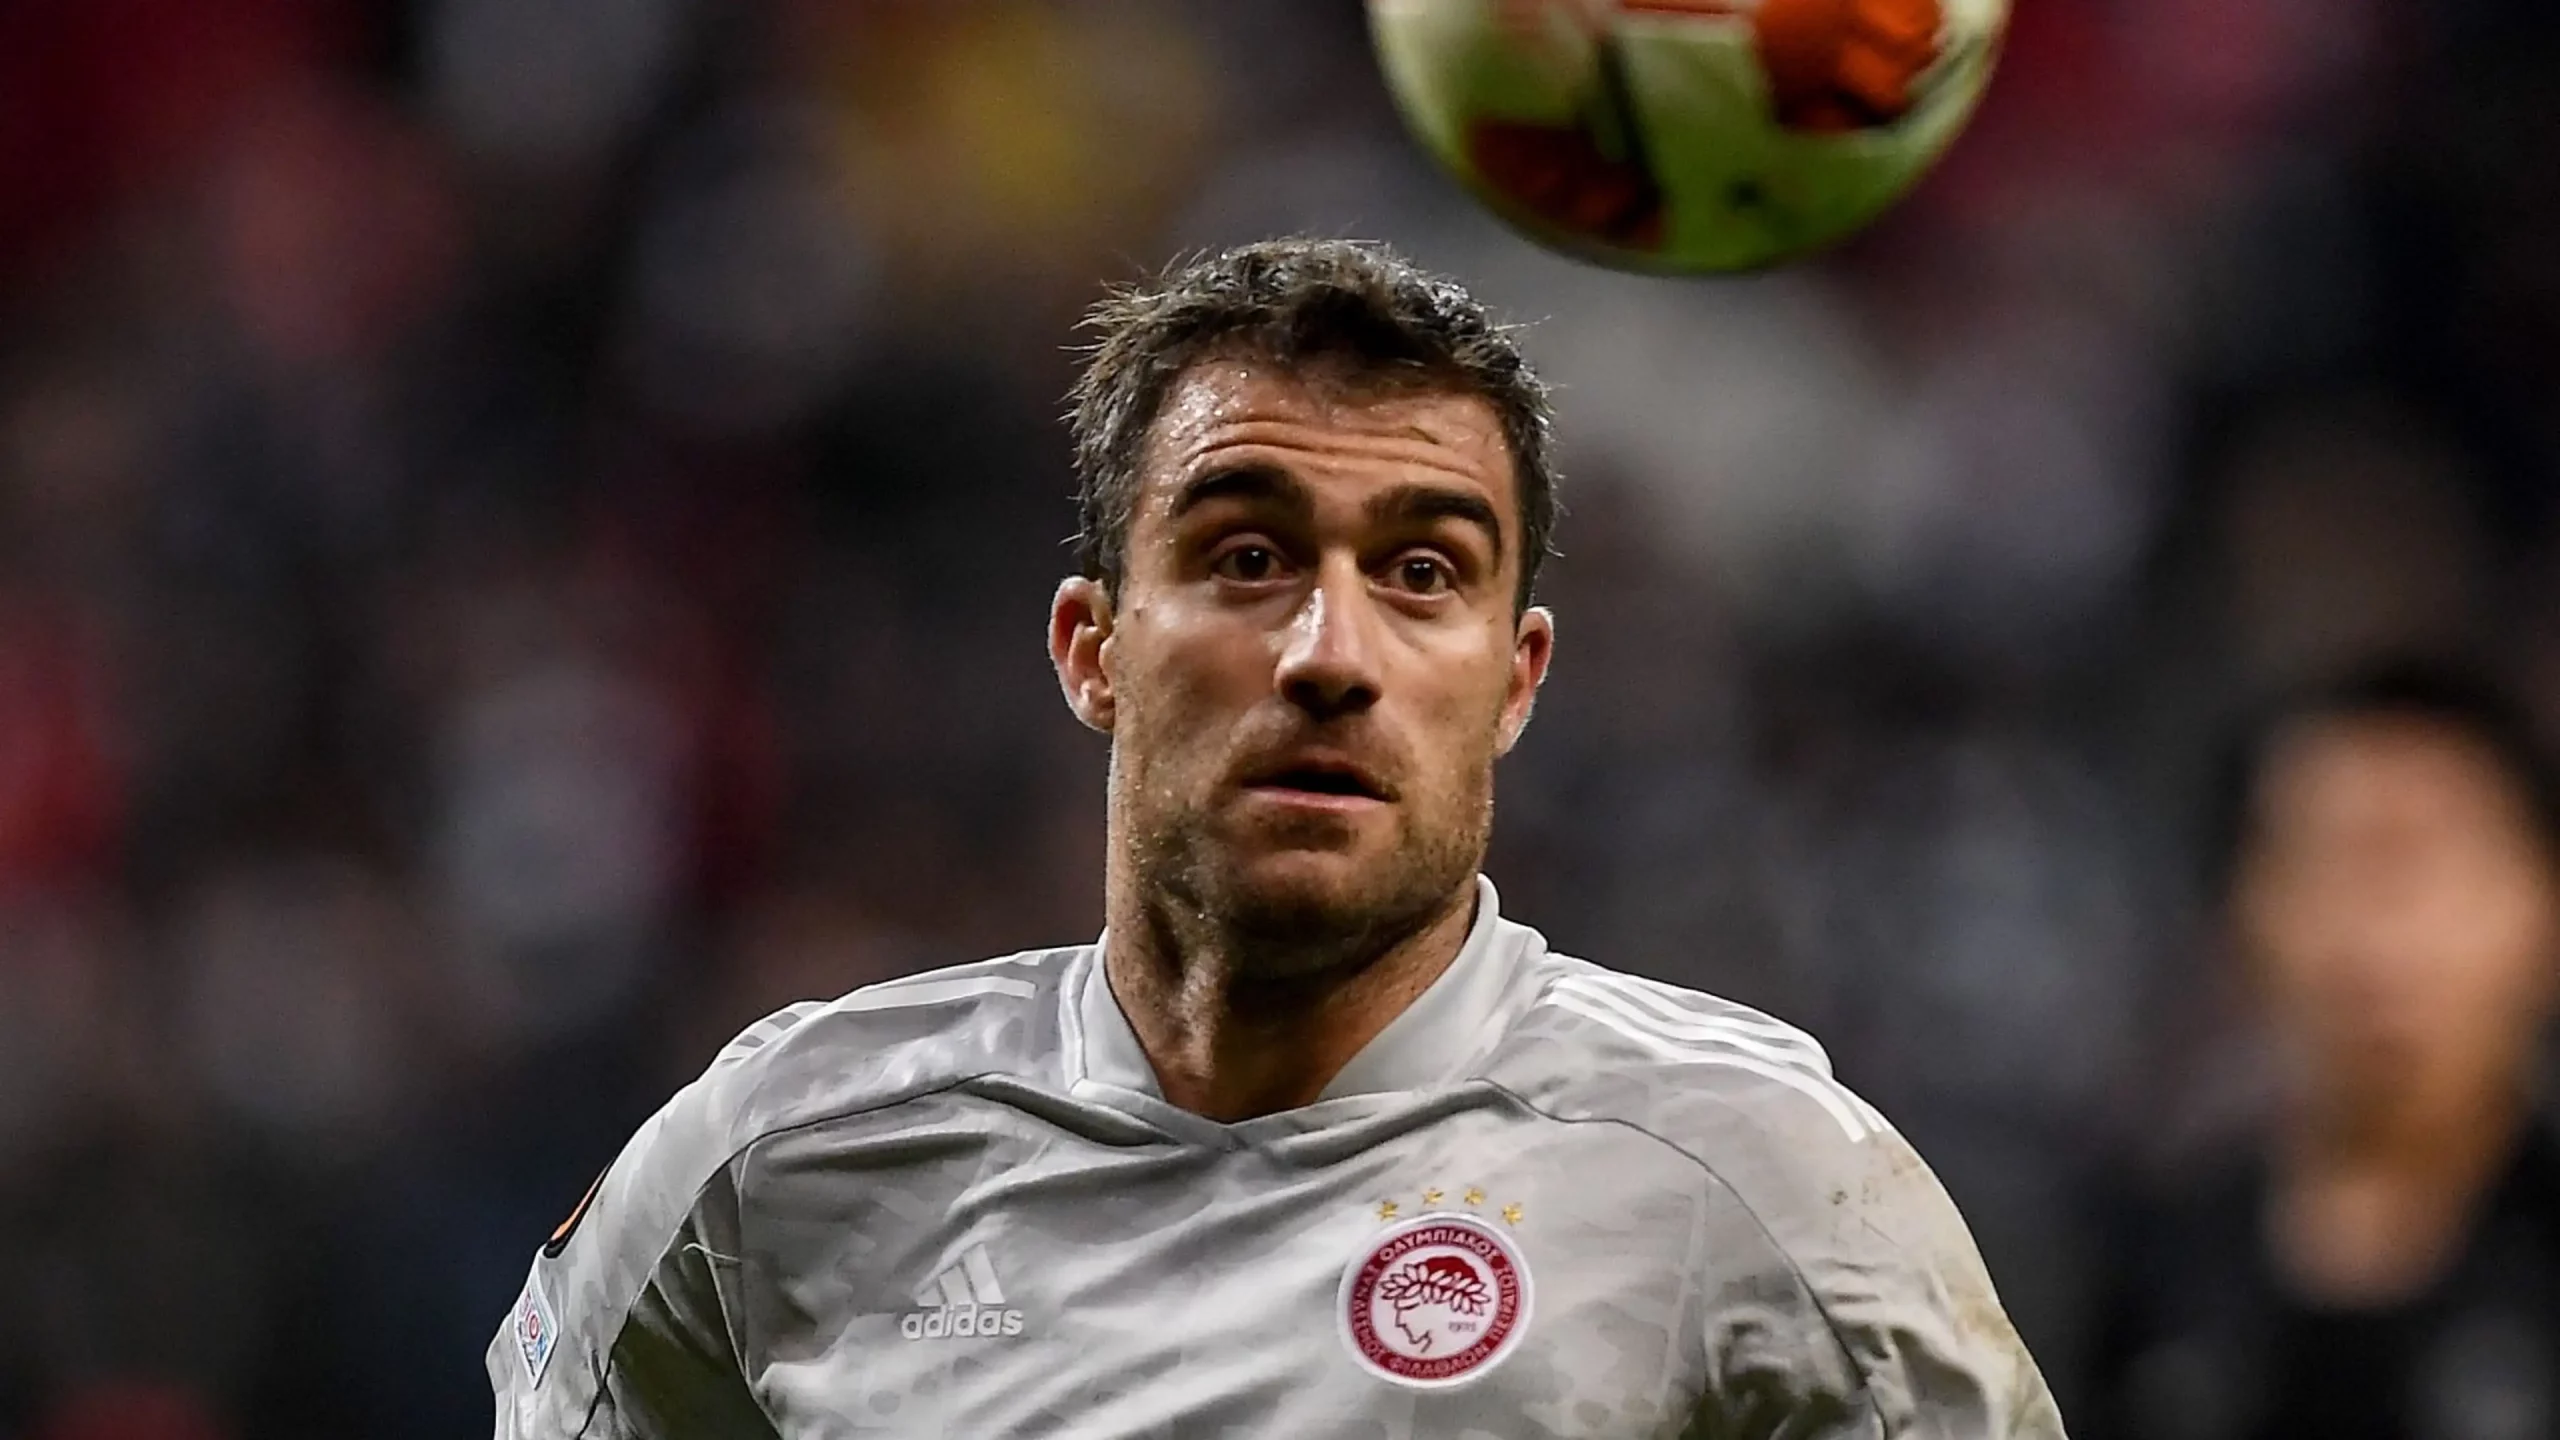 A Bosman transfer, Papastathopoulos could be a worthwhile asset, given his low wages and veteran experience. An Italy return after 12 years is in the works.